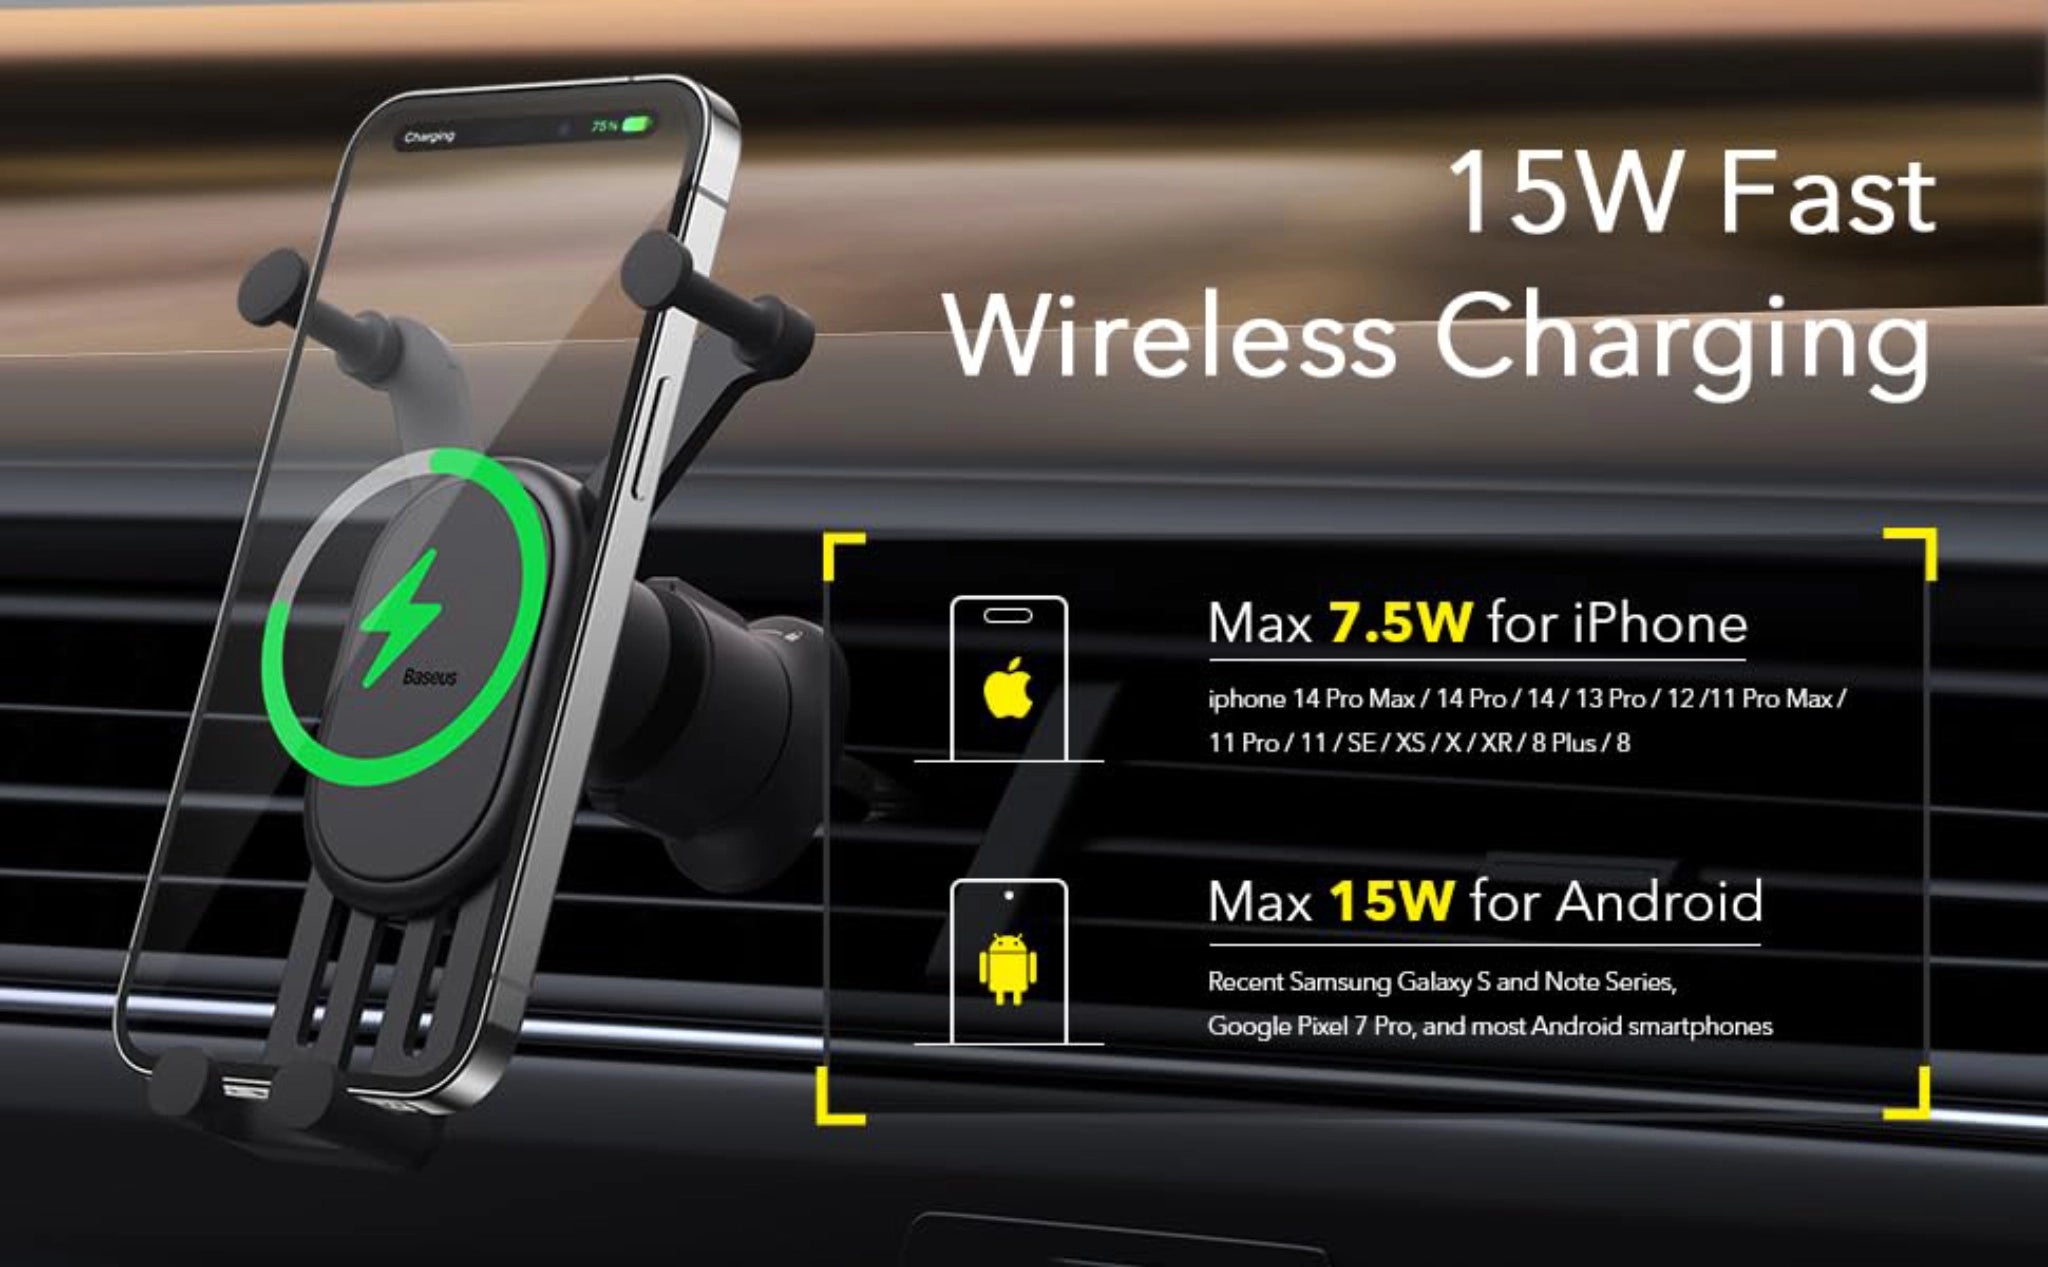 Baseus Car Mount Holder Mobil Fast Wireless Charger 15w Auto Clamp – Baseus  Indonesia